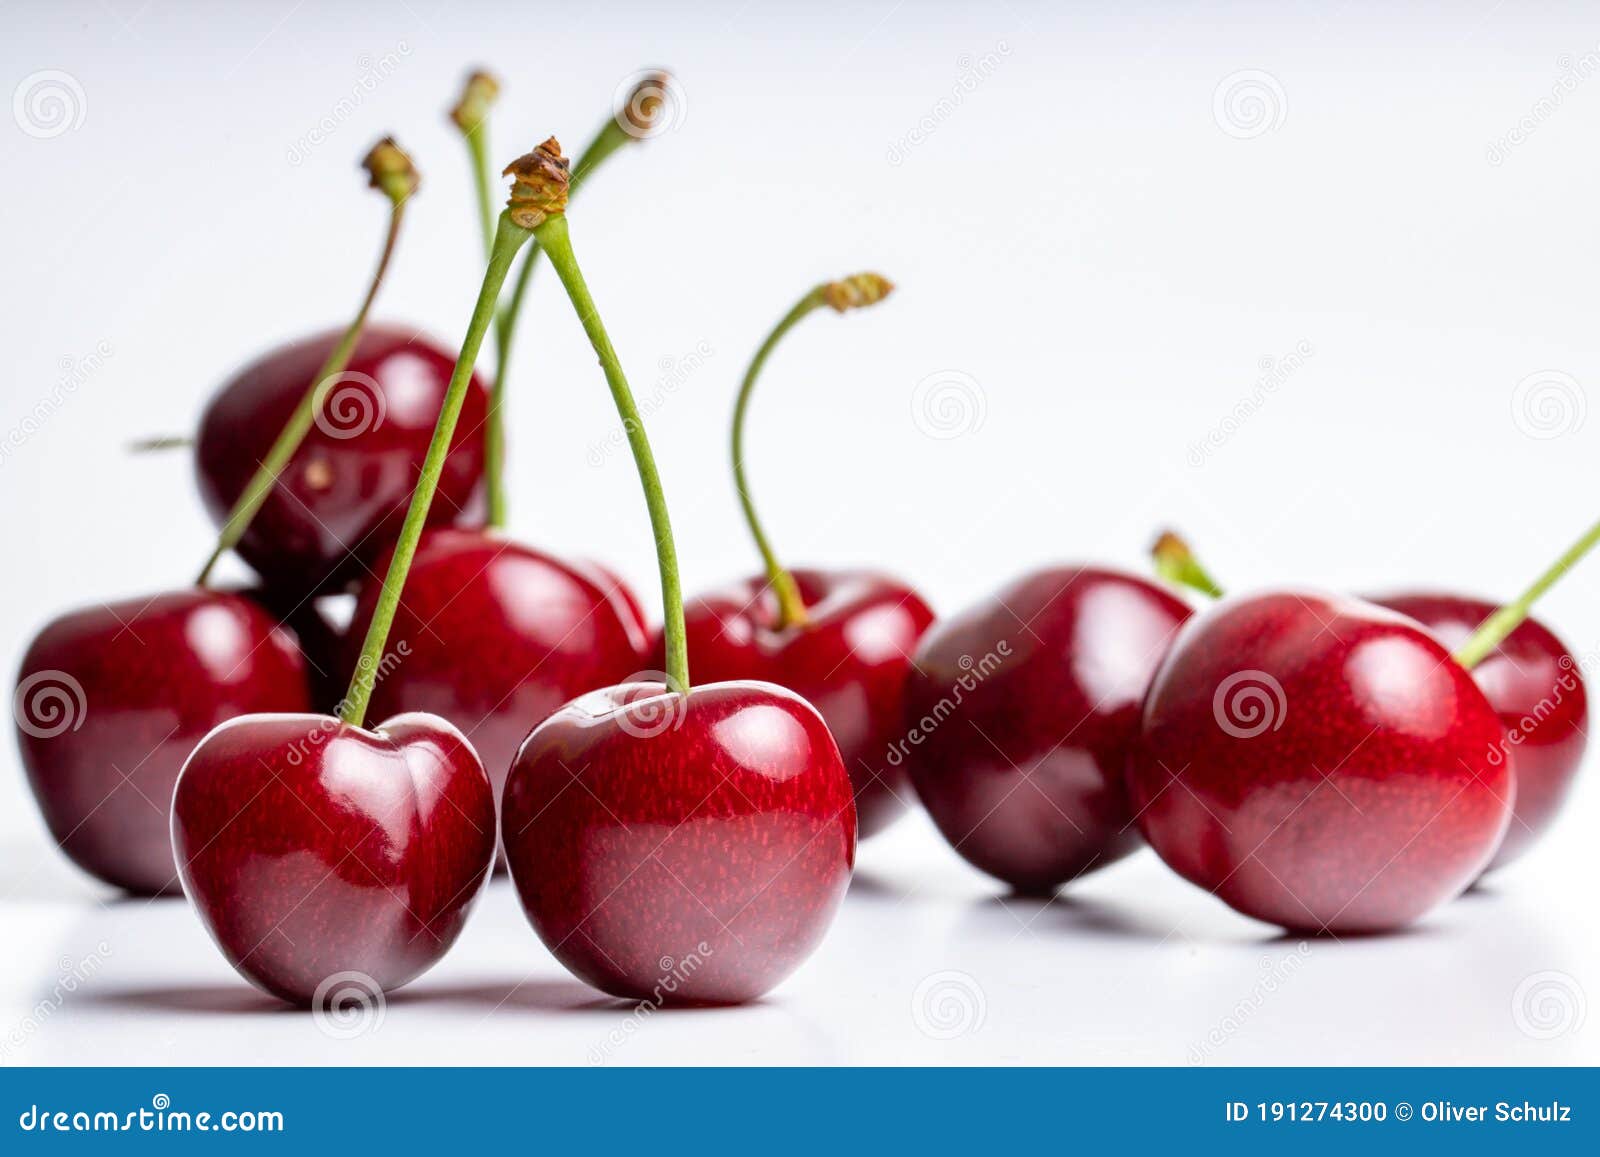 Group Of Red And Dark Red Cherries With Green Stems Top Facing Three Cherries Are In Focus On White And Light Grey Background Stock Photo Image Of Fruit Cherries